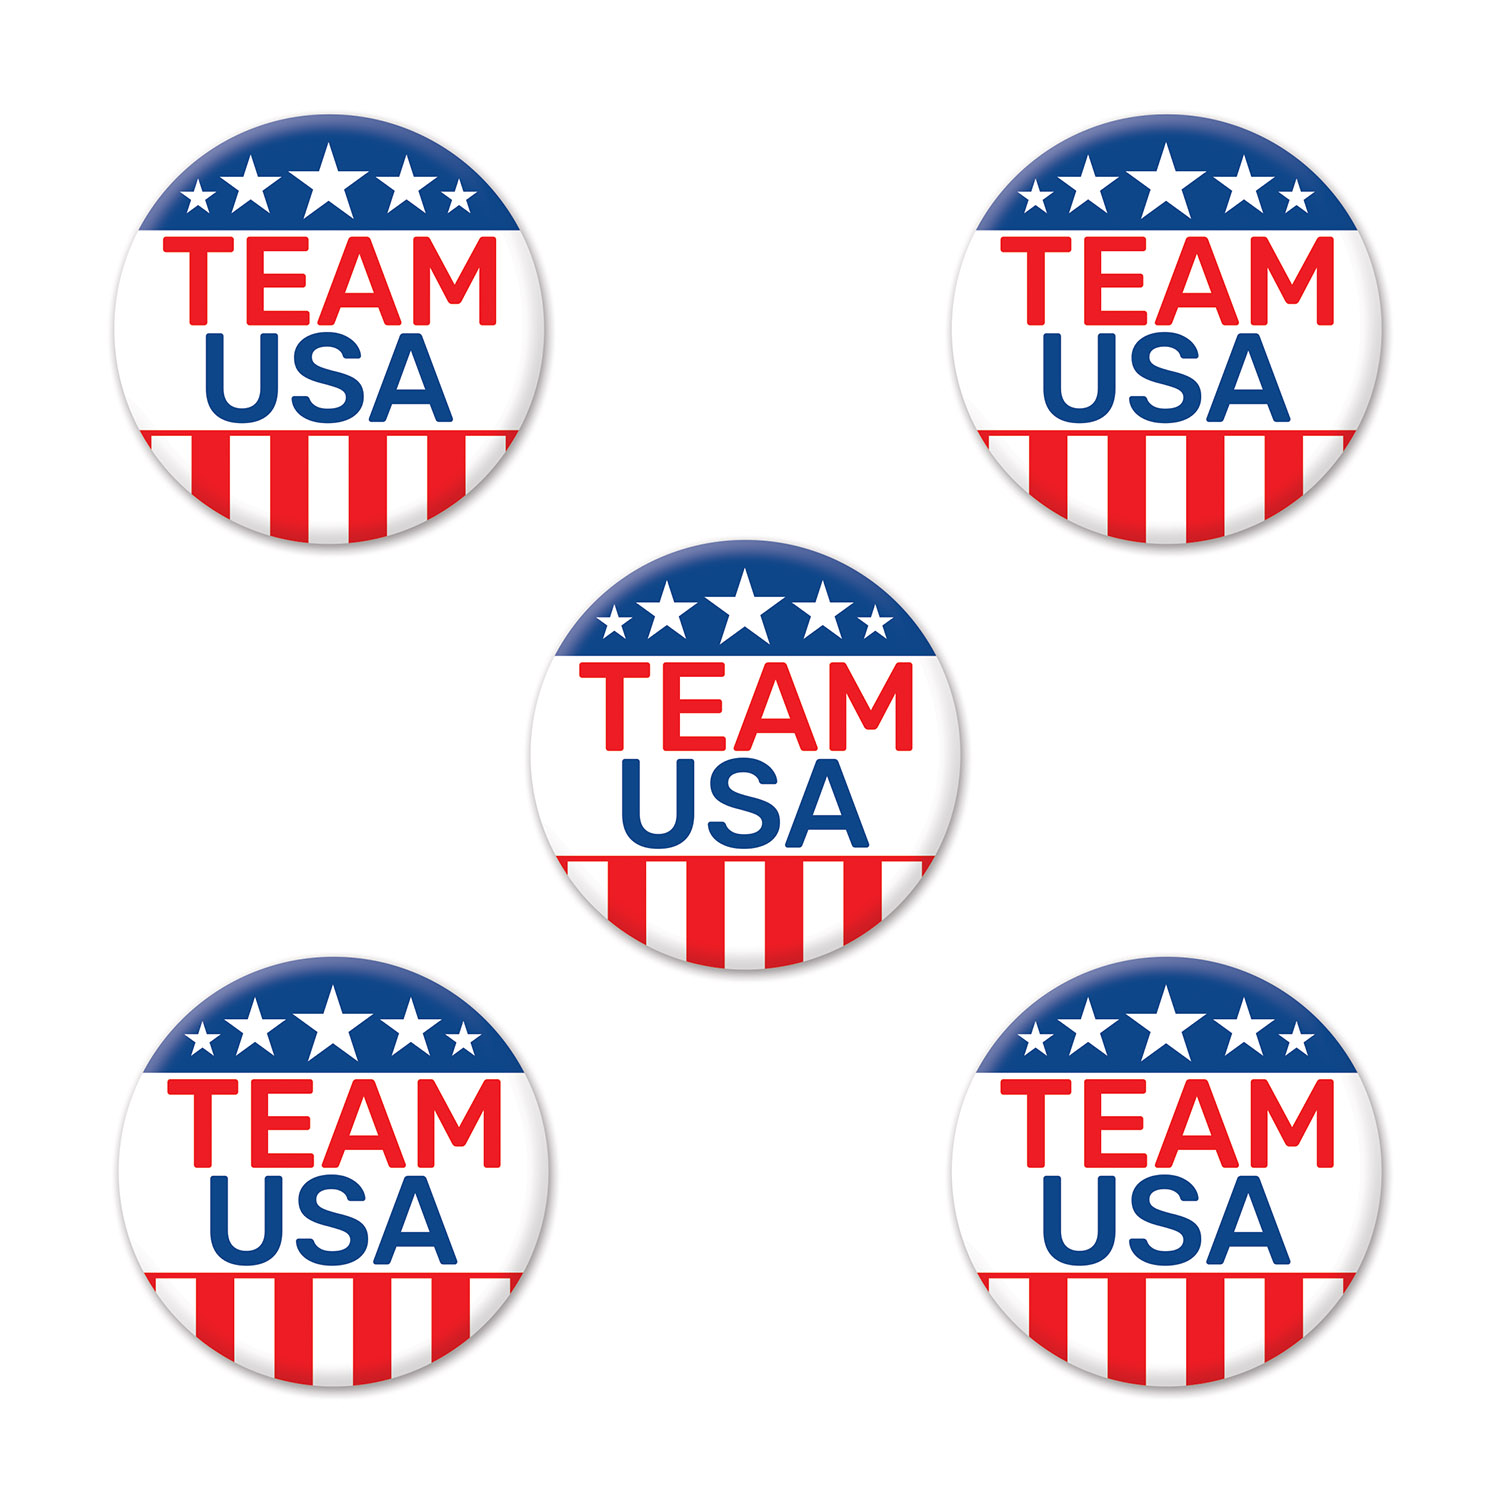 Team USA Party Buttons (12) image